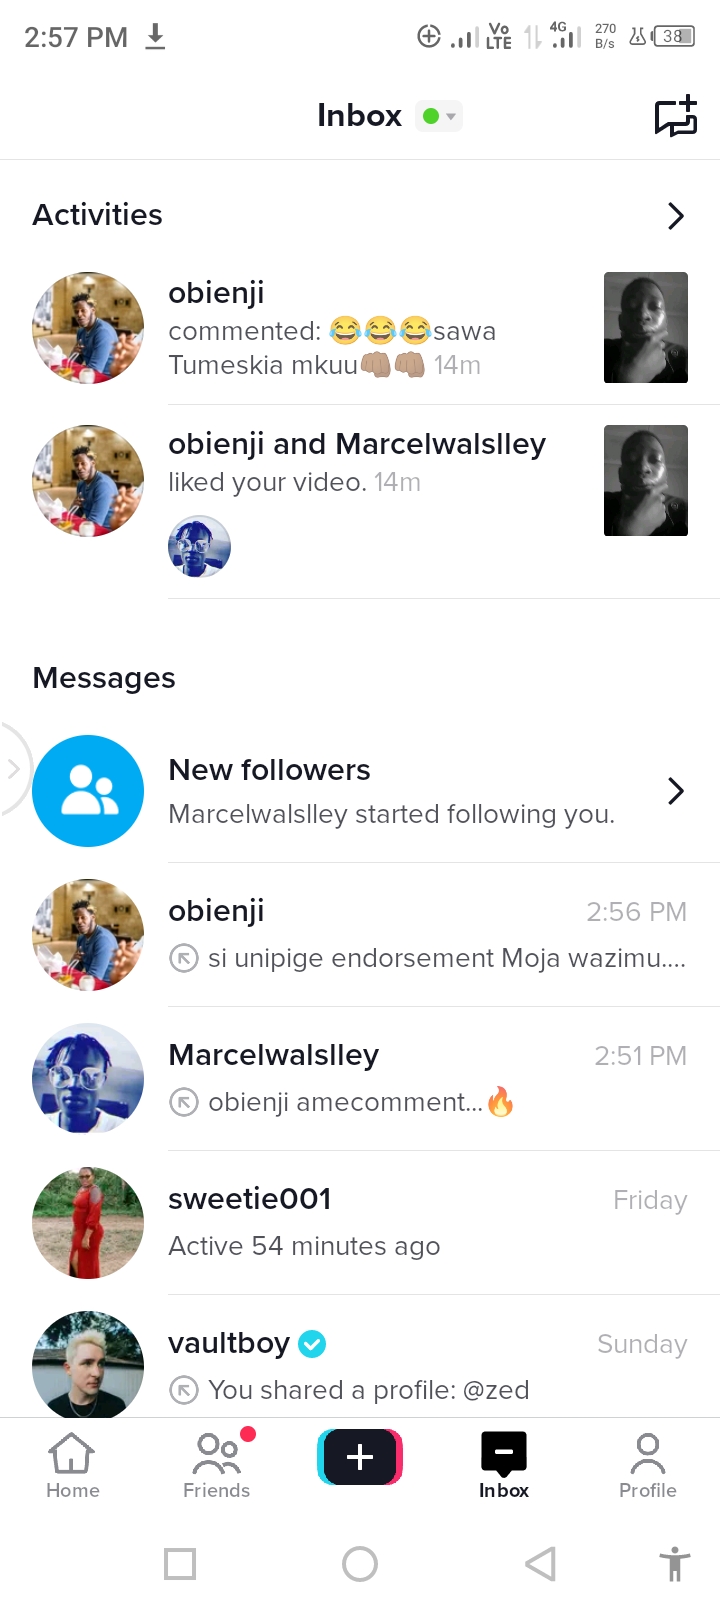 2:57PM @ alge ND aCE

Inbox @-

Activities

   

obienji and Marcelwalslley
liked your video.

0

>
obienji \
commented: 2&3 &isawa J
Tumeskia mkuu @) @

 

&

Messages

New followers
Marcelwalslley started following you.

obienji

si unipige endorsement Moja wazimu...

Marcelwalslley
obienjiamecomment... a

sweetie001

 

Active 54 minutes ago

p vaultboy ©
You shared a profile: @zed

= @ | 2

Home Friends Inbox Profile